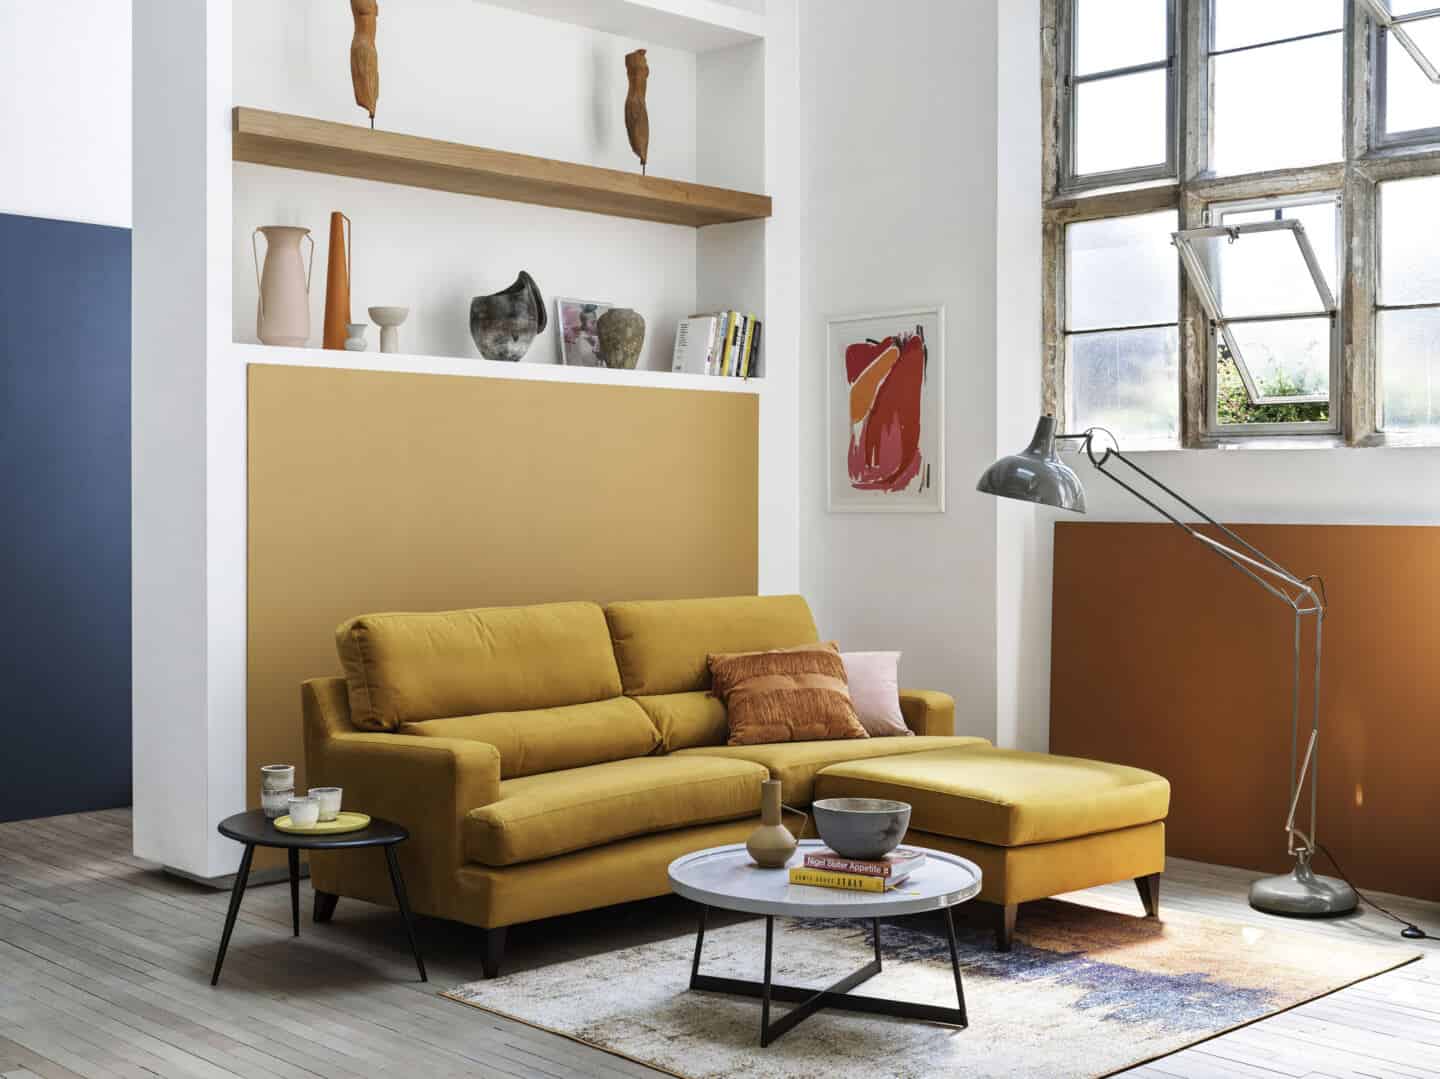 A yellow mid-century modern sofa with built-in shelving behind and industrial windows to the side.